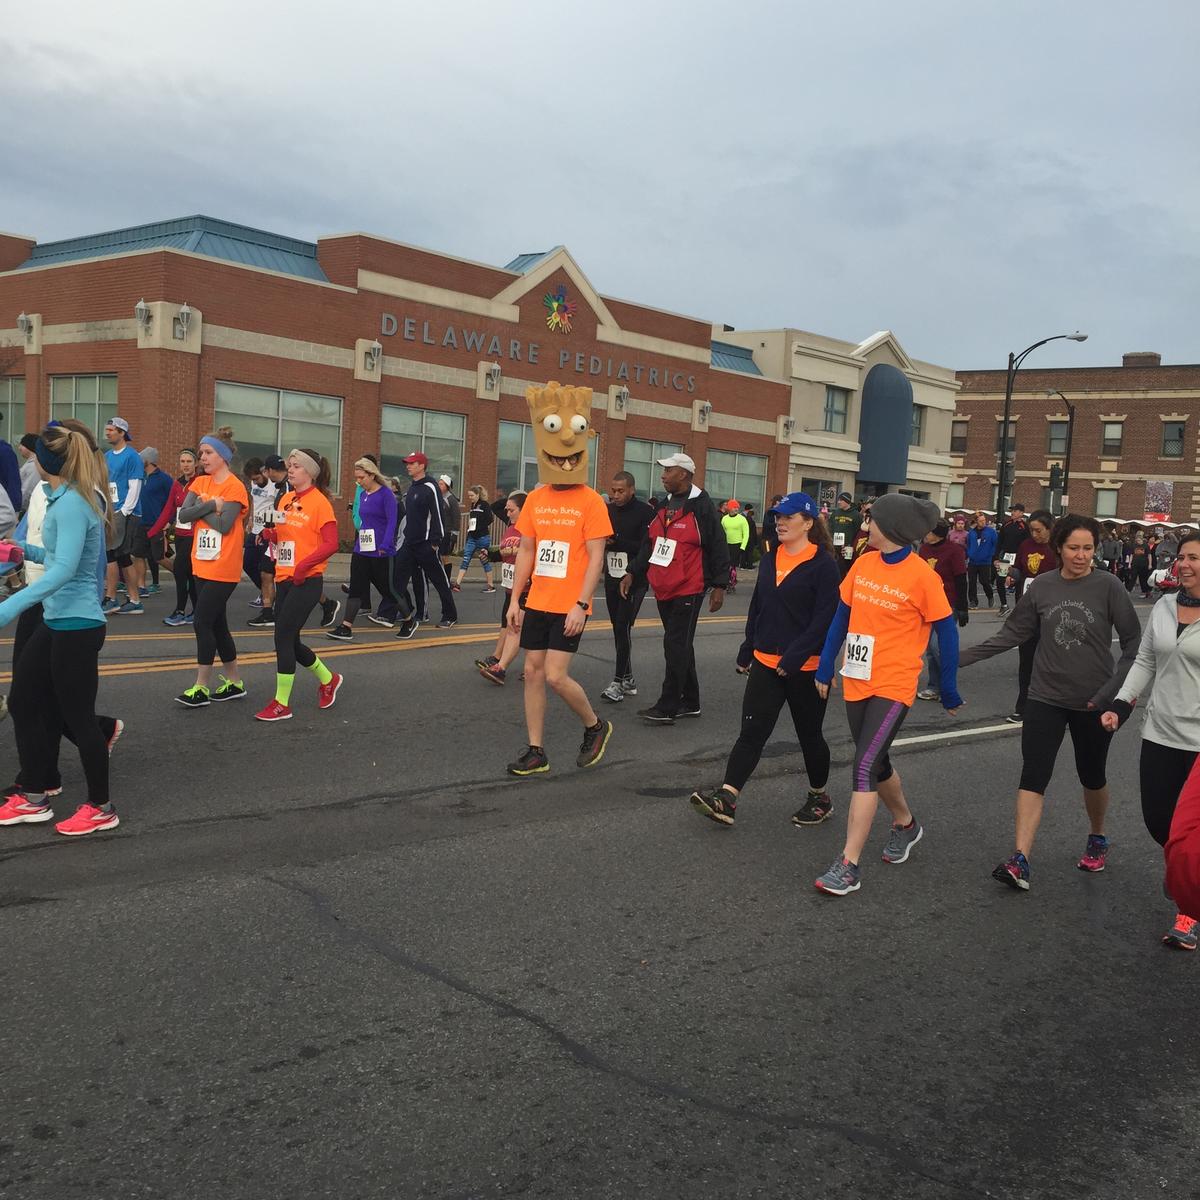 Turkey Trot attracts 14,000 runners, many in unique garb WBFO